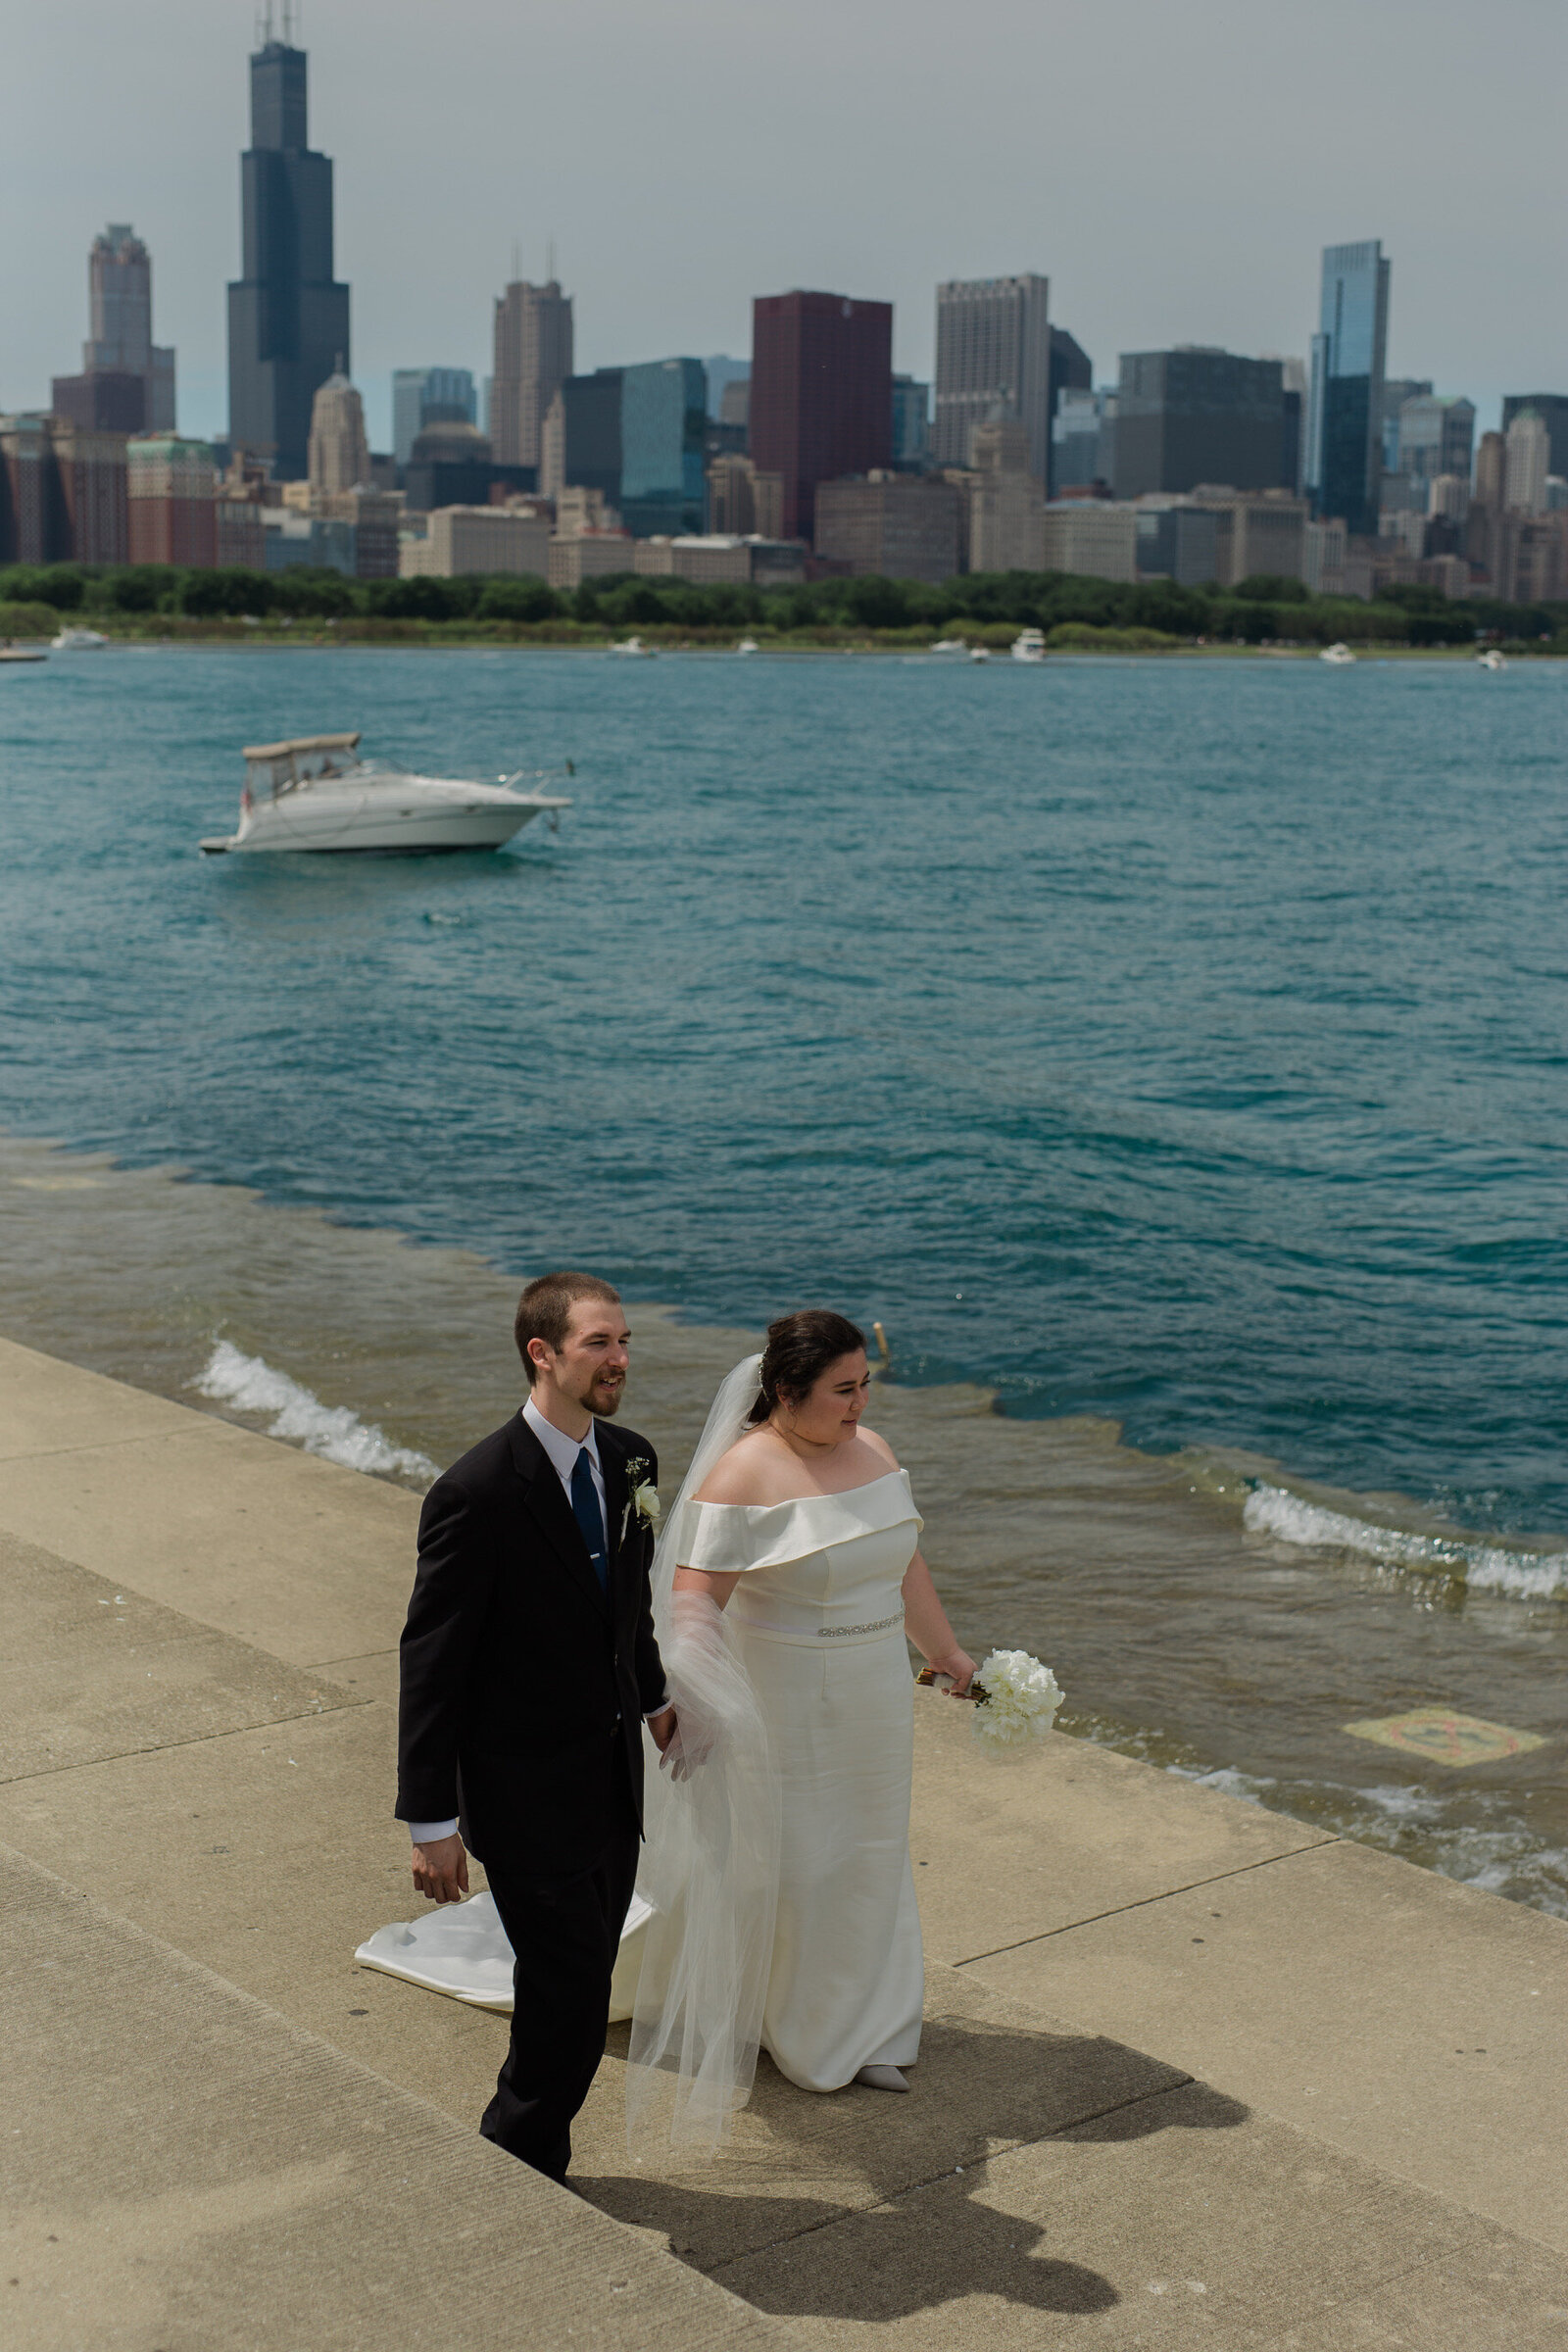 Couple walk by the sideline of the view of Chicago